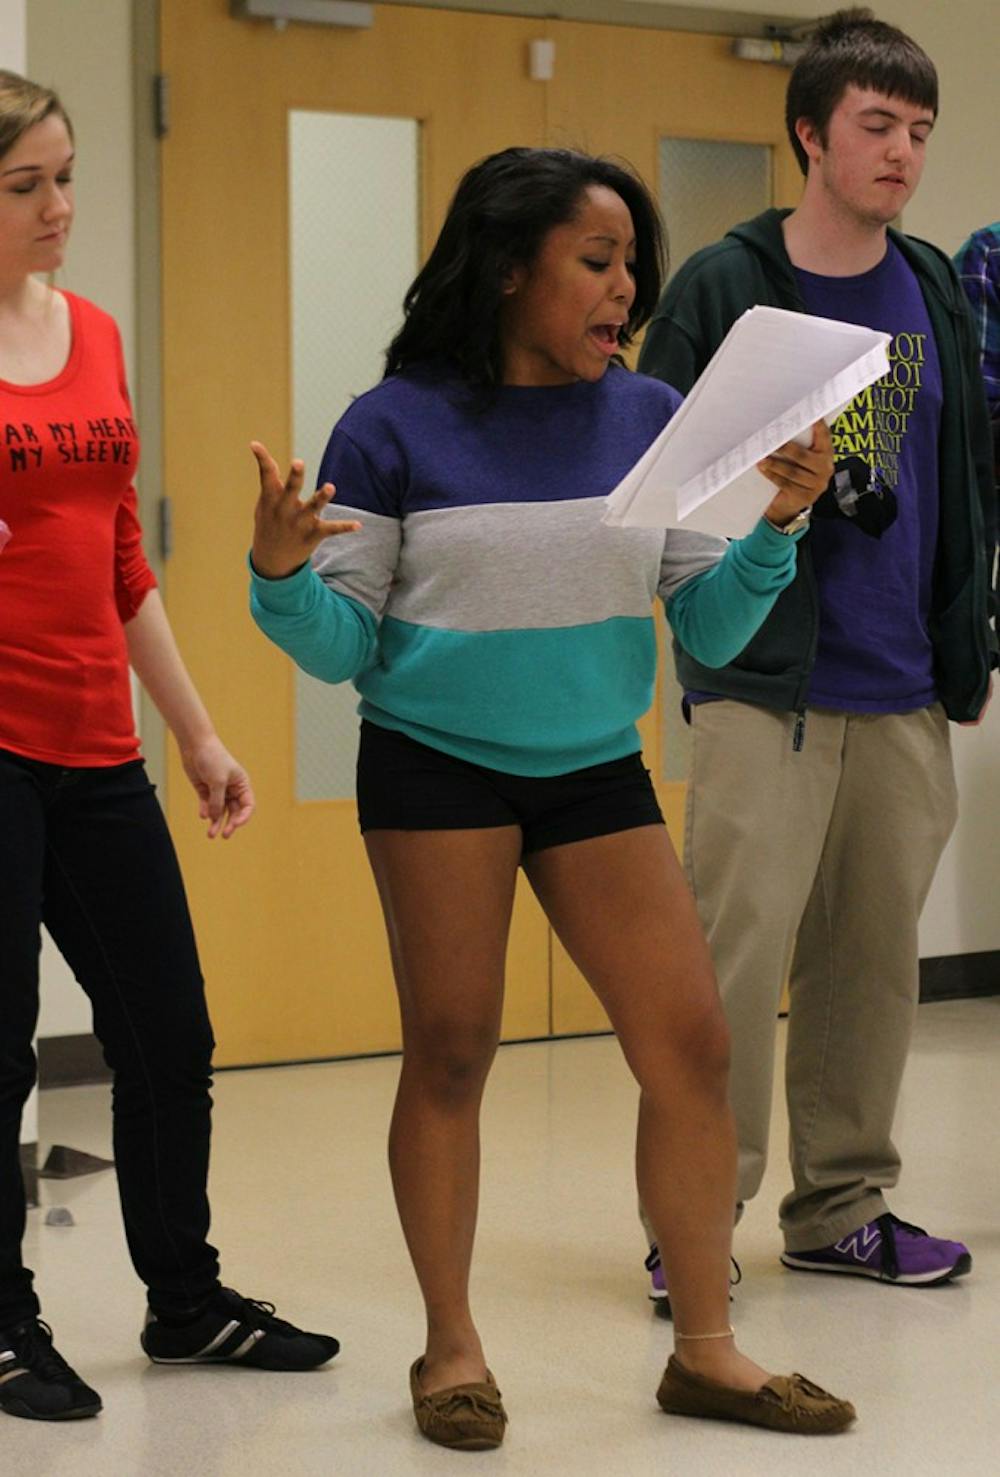 Student performer Mariah Barksdale auditions in the UNC Student Union during callbacks for Pauper Player's production of Avenue Q.